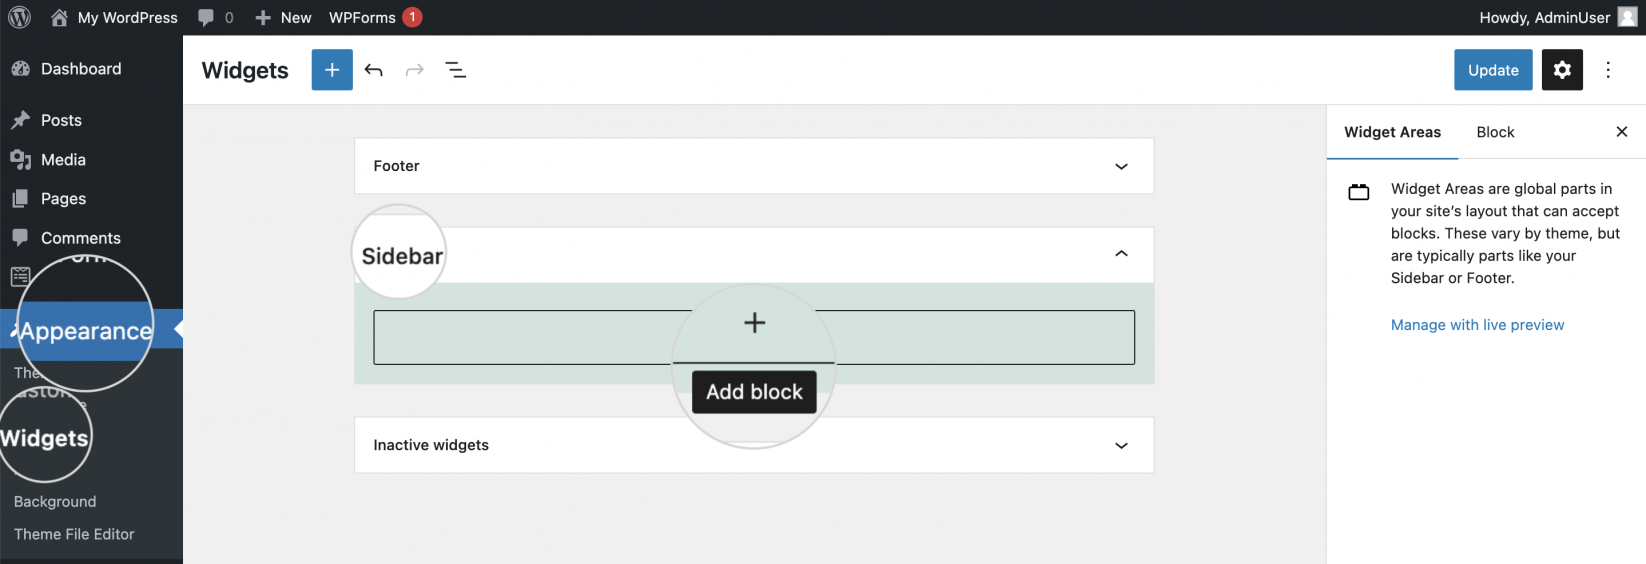 How to a contact form widget to the sidebar in WordPress